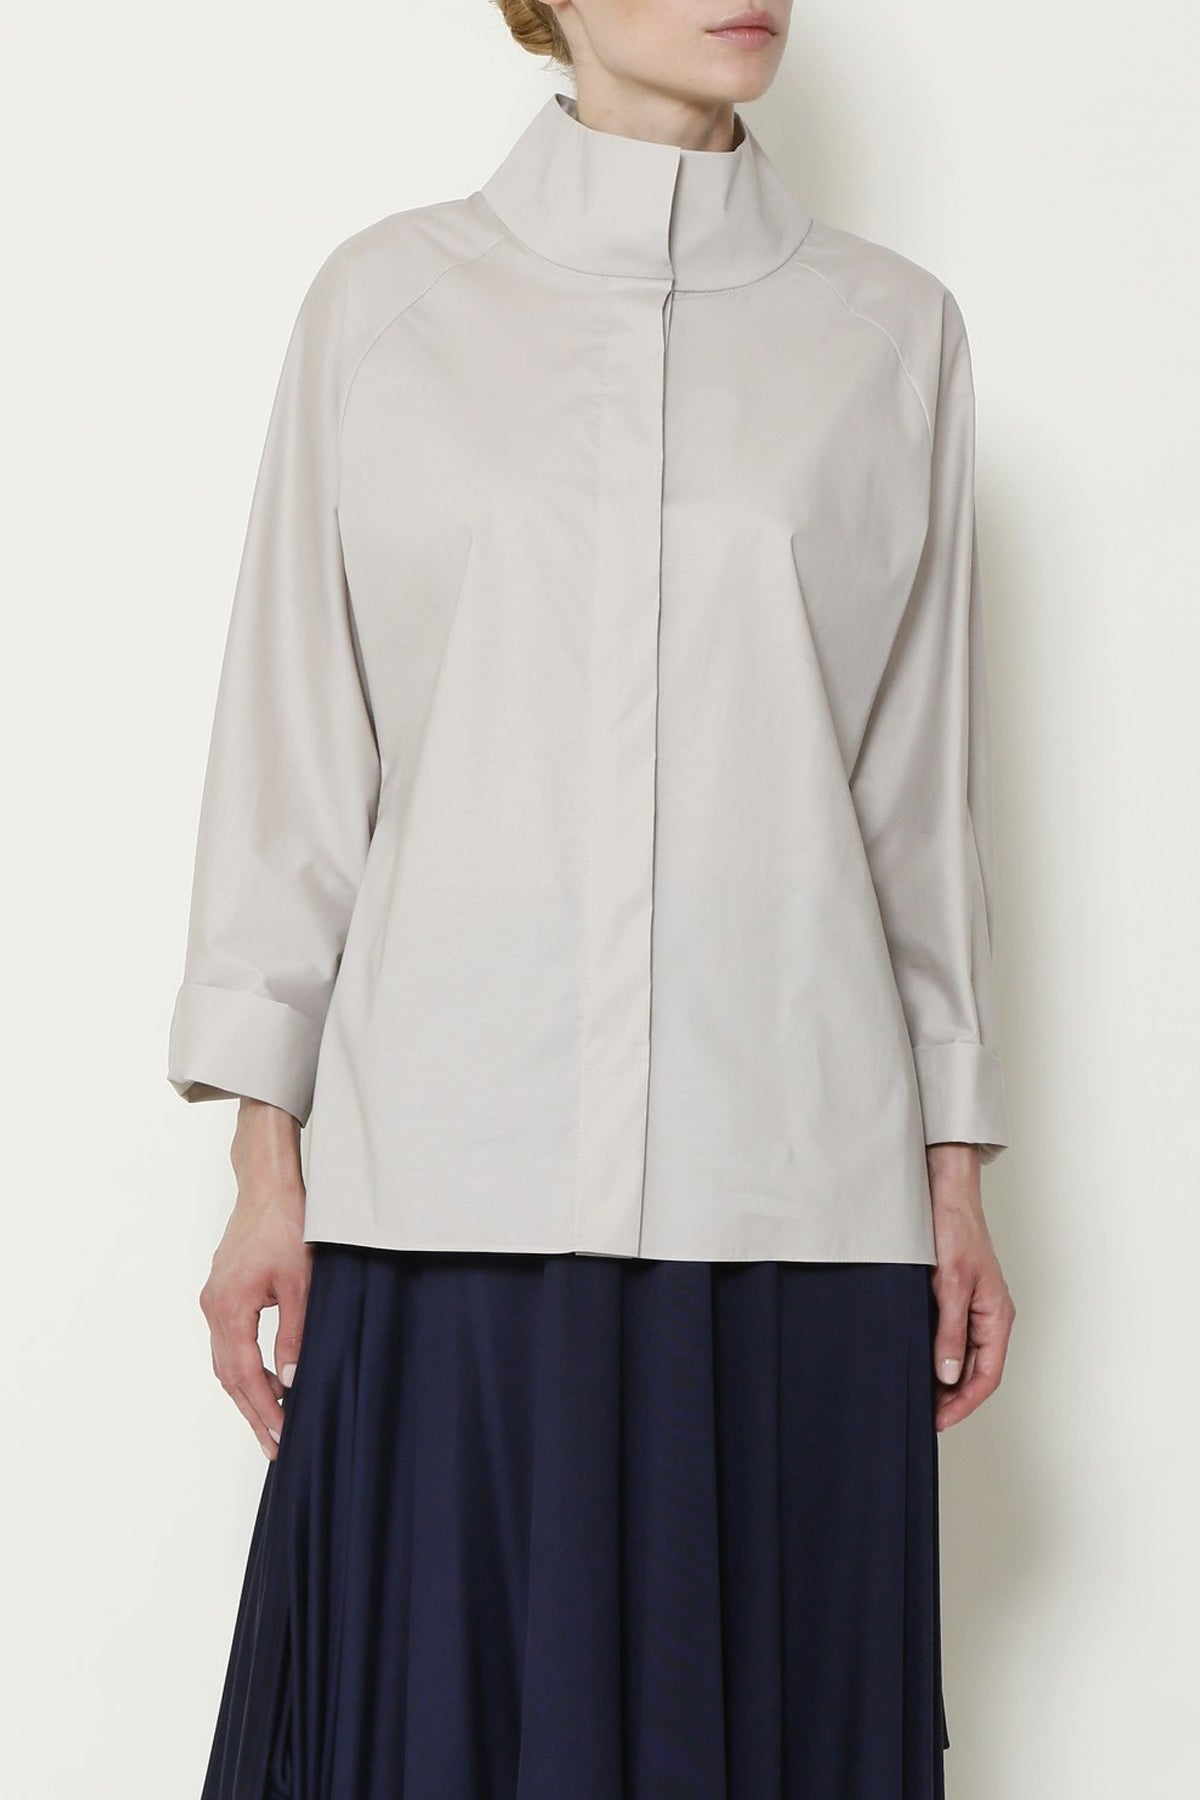 The Zoom Blouse in Paper Cotton with Raglan Sleeves and a High Collar - 1